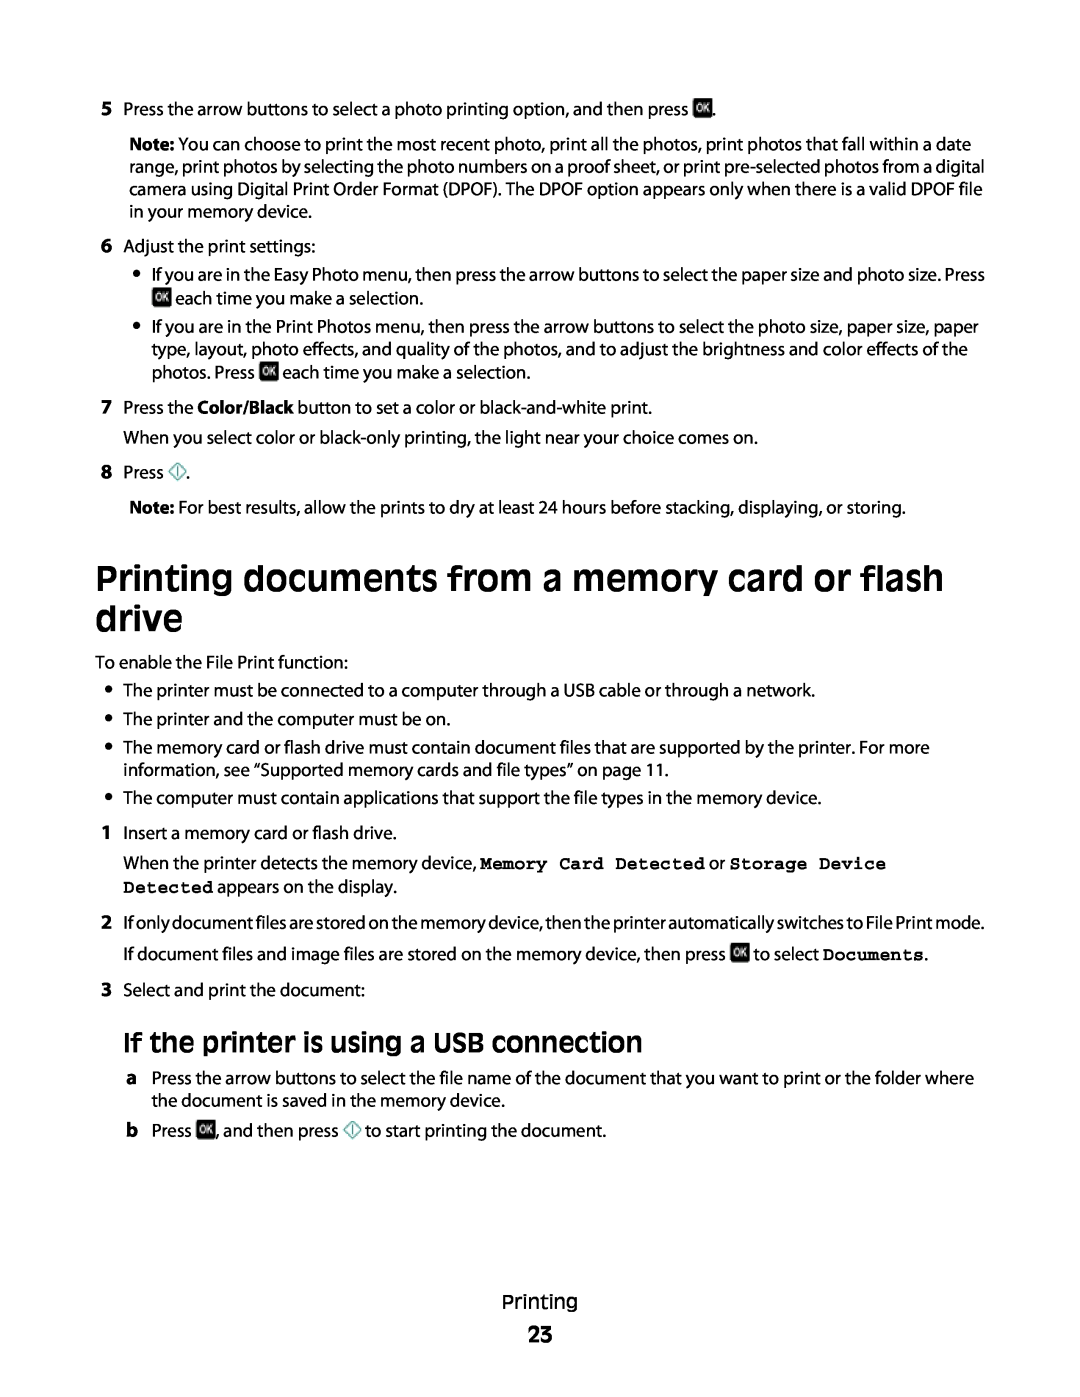 Lexmark S300 manual If the printer is using a USB connection 